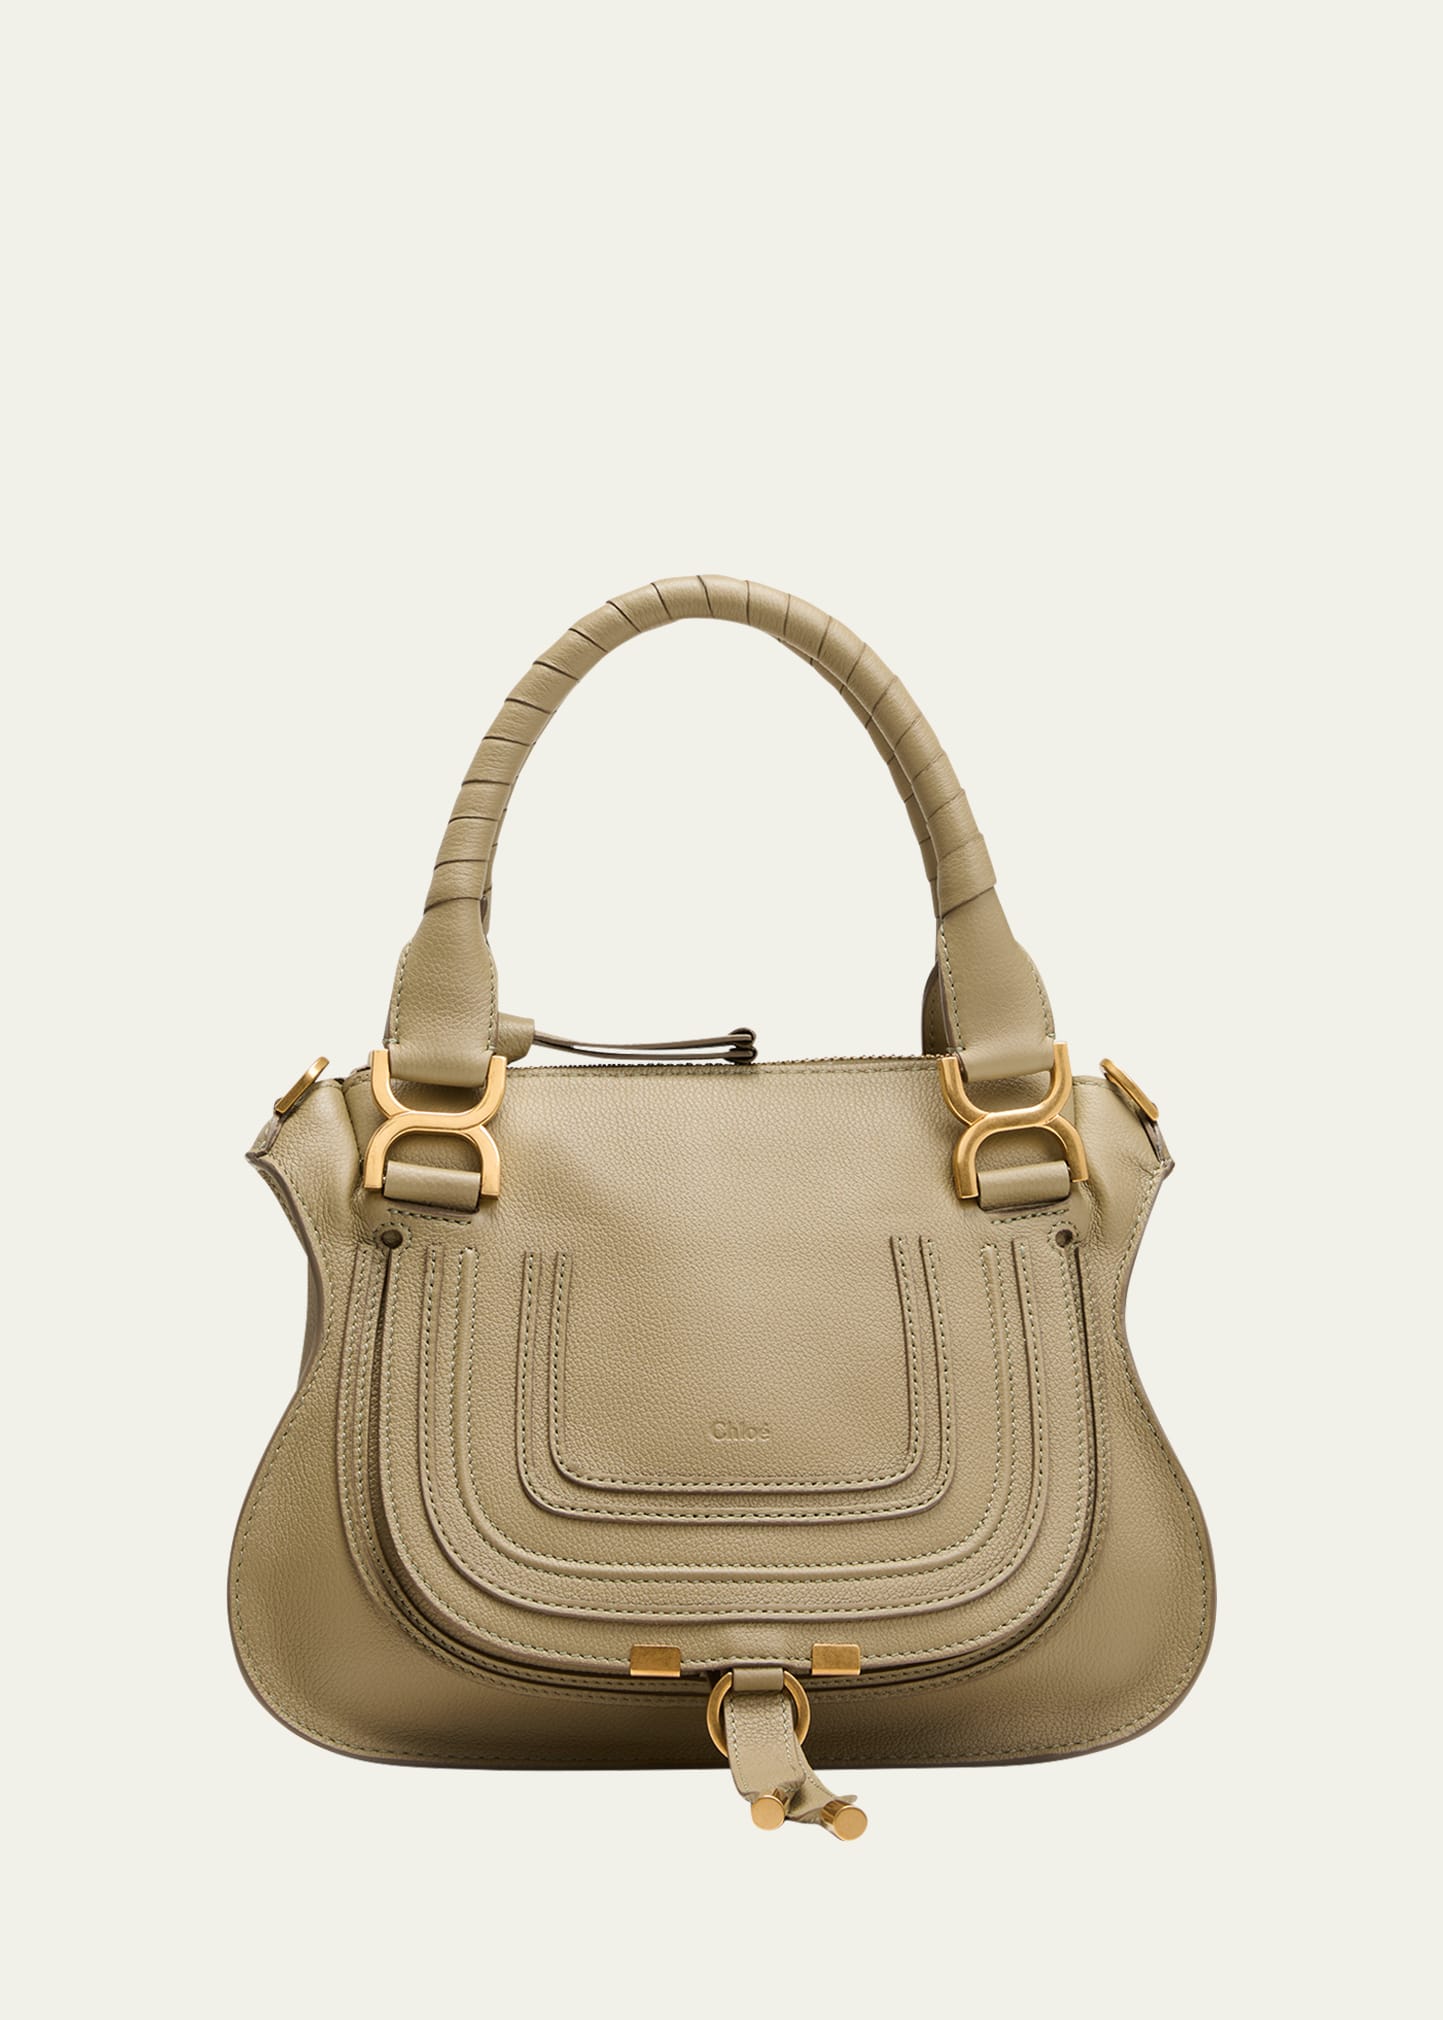 CHLOÉ MARCIE SMALL DOUBLE CARRY SATCHEL BAG IN GRAINED LEATHER